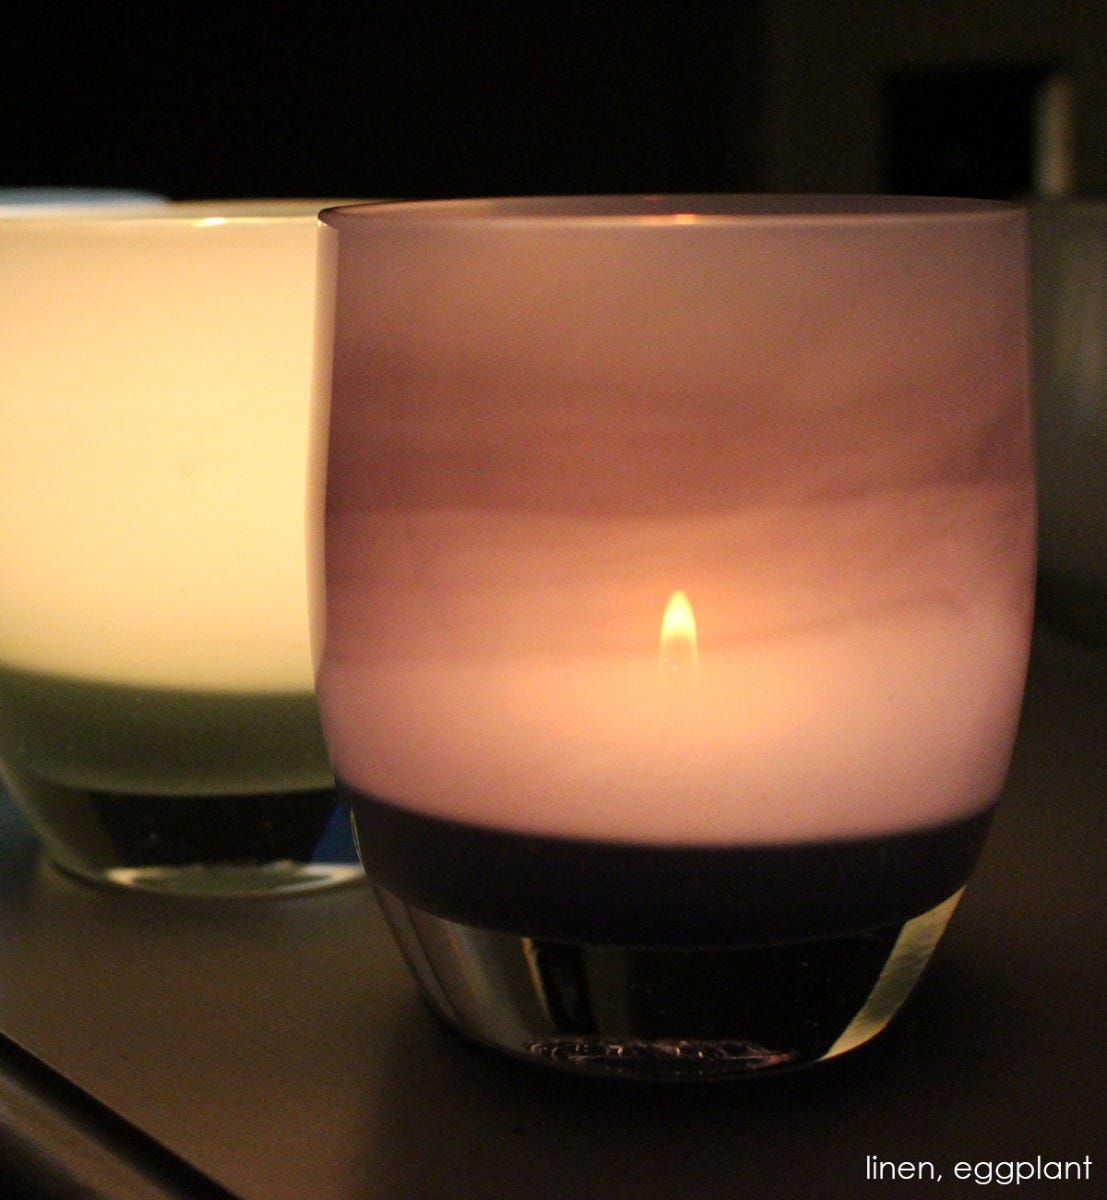 eggplant purple glass hand-blown glass votive candle holder. Paired with linen on a dark surface.